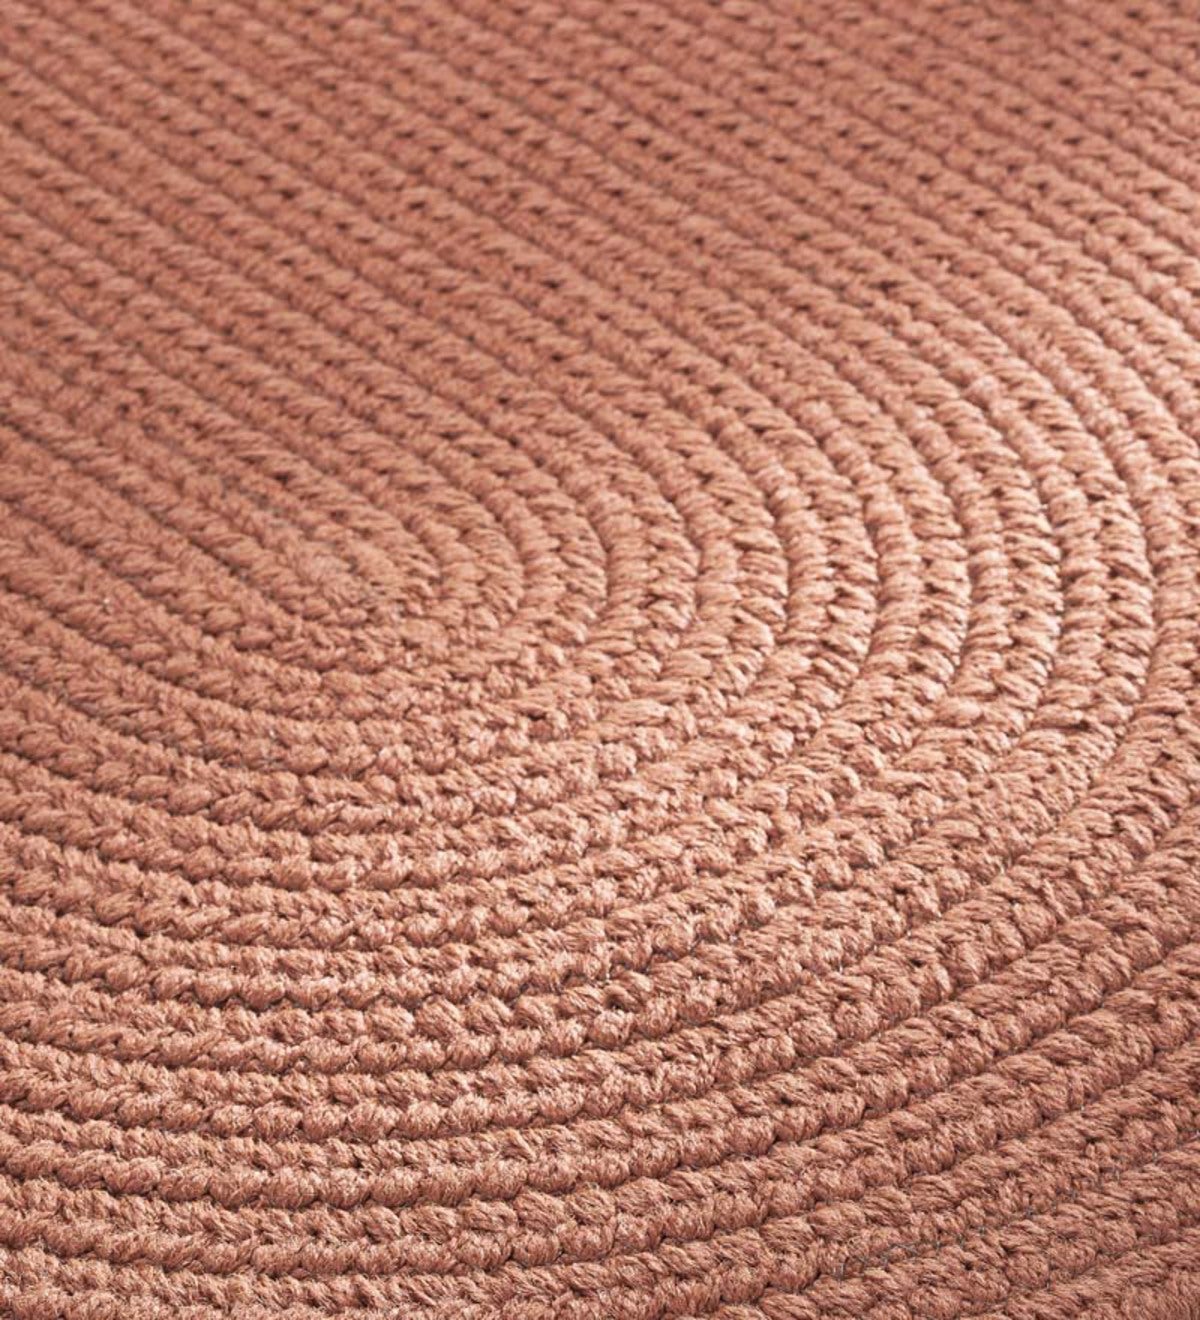 2'6”W x 8'6”L Runner  Braided Rug - Almond Solid